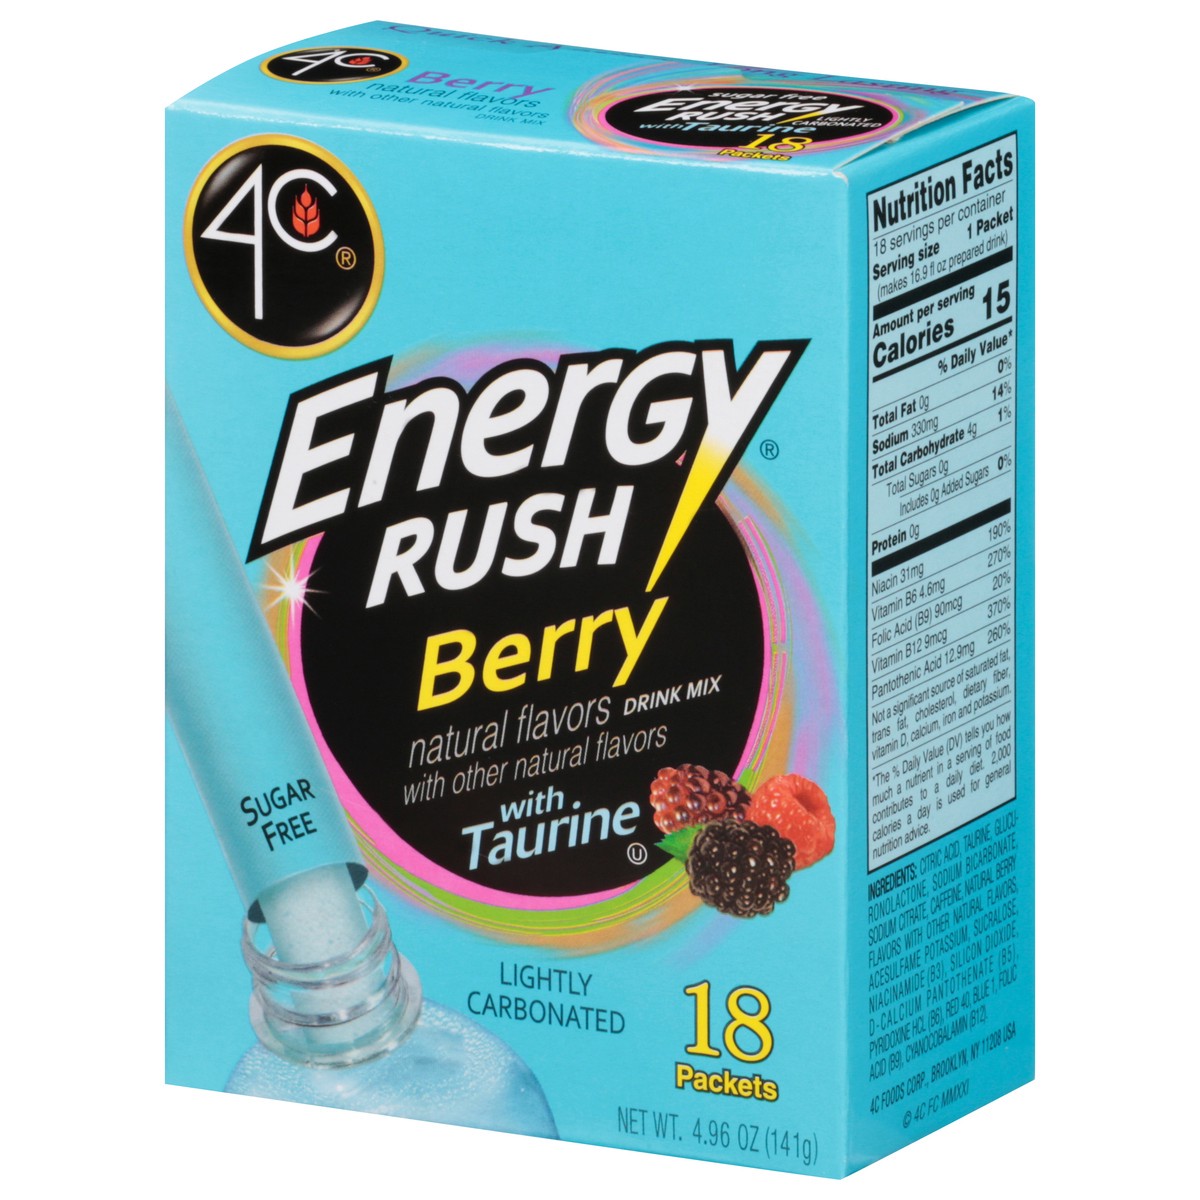 slide 5 of 14, 4C Drink Mix Sgr/Free Energy Rush Be, 18/4.96